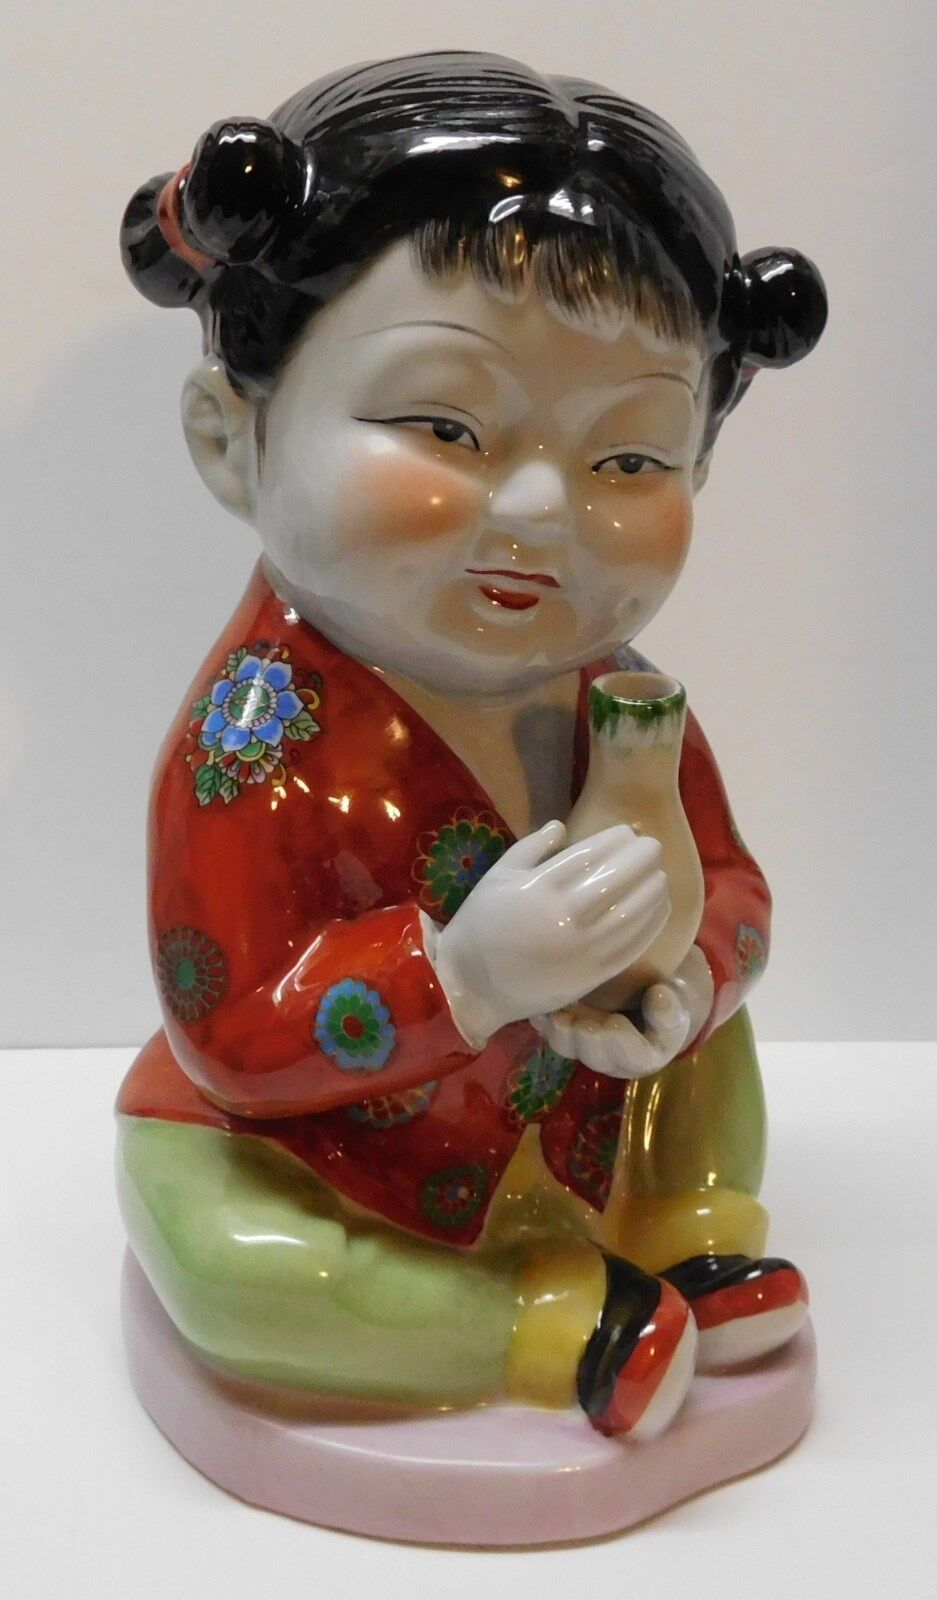 Chinese Girl Pigtails Figure Statue Kimono with Flowers Holding Vase Vintage 